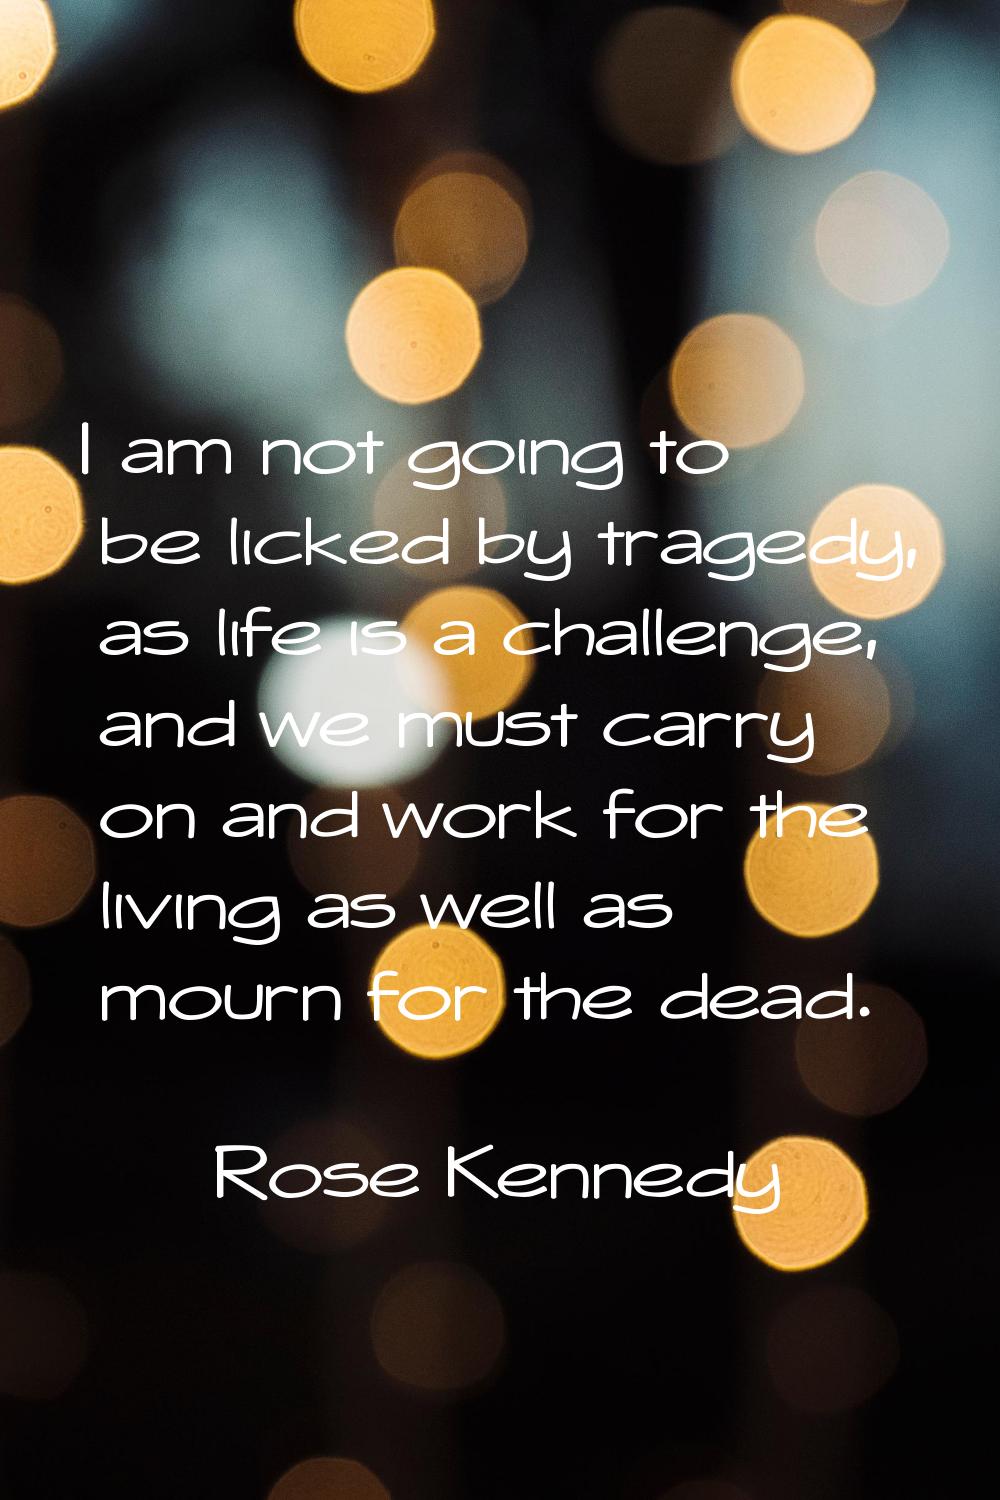 I am not going to be licked by tragedy, as life is a challenge, and we must carry on and work for t